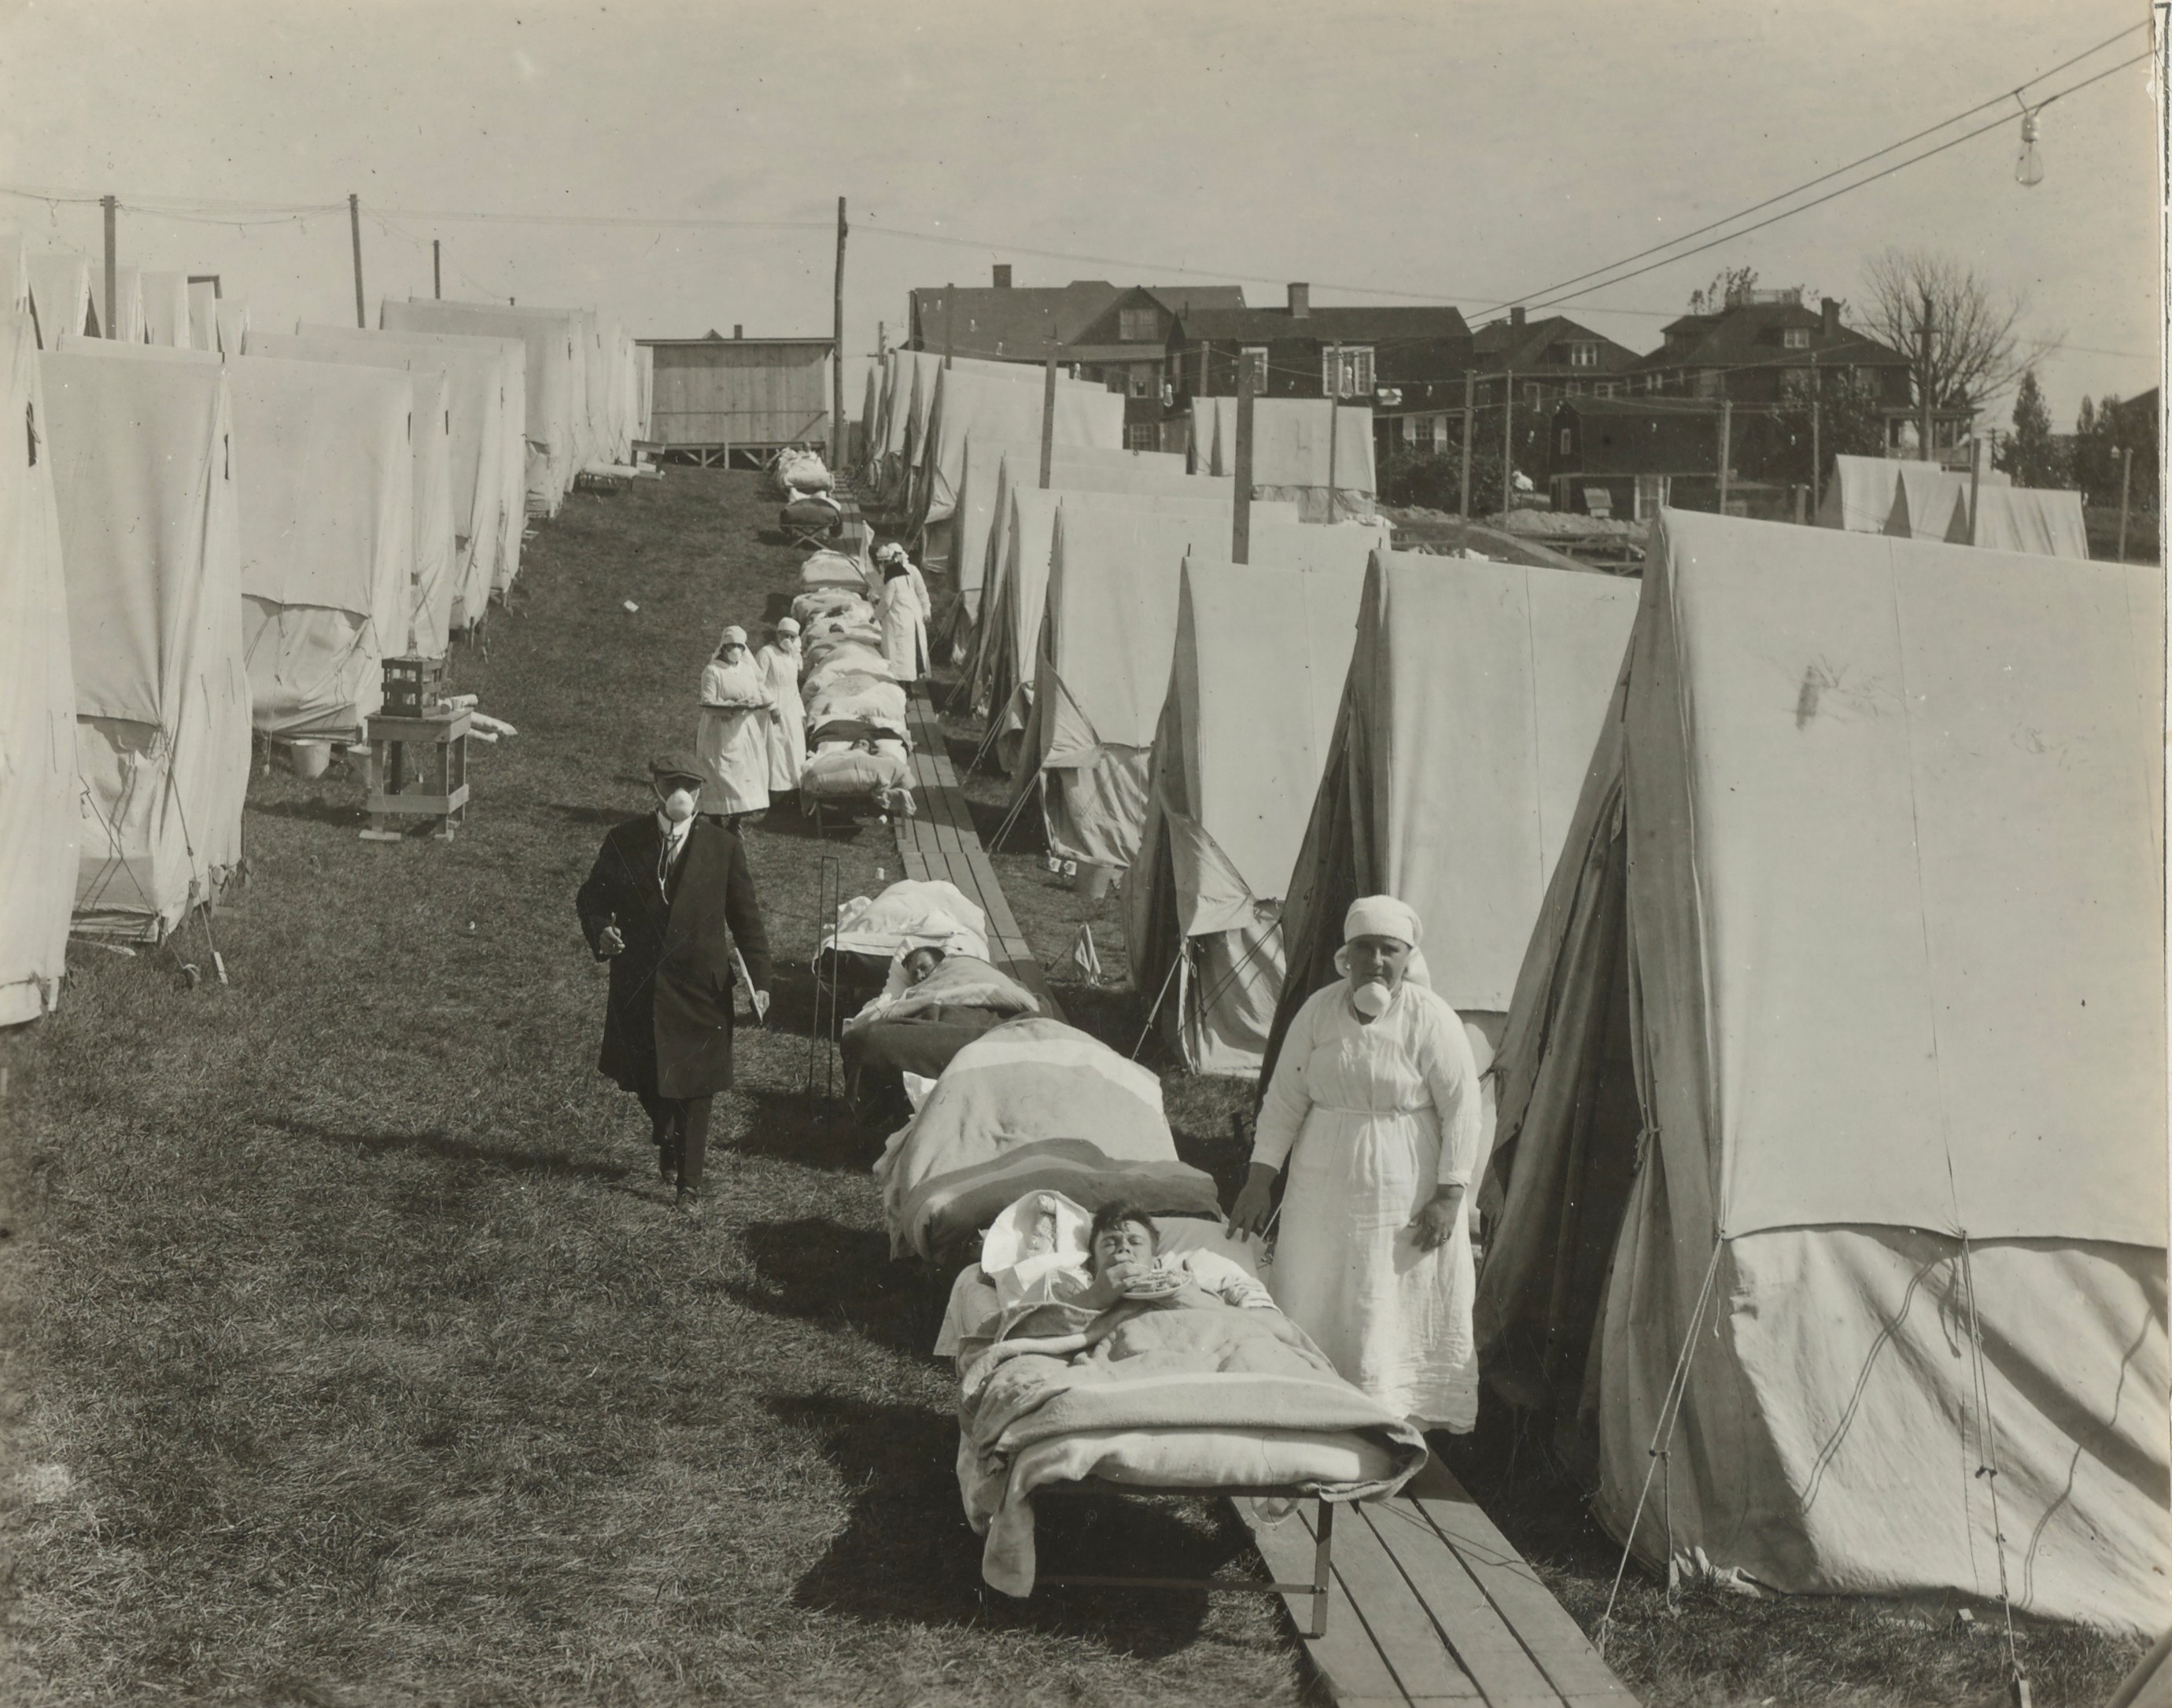 A special tent clinic during the 1918-19 Spanish flu pandemic, which killed 50 million people or more worldwide. Credit: National Archives